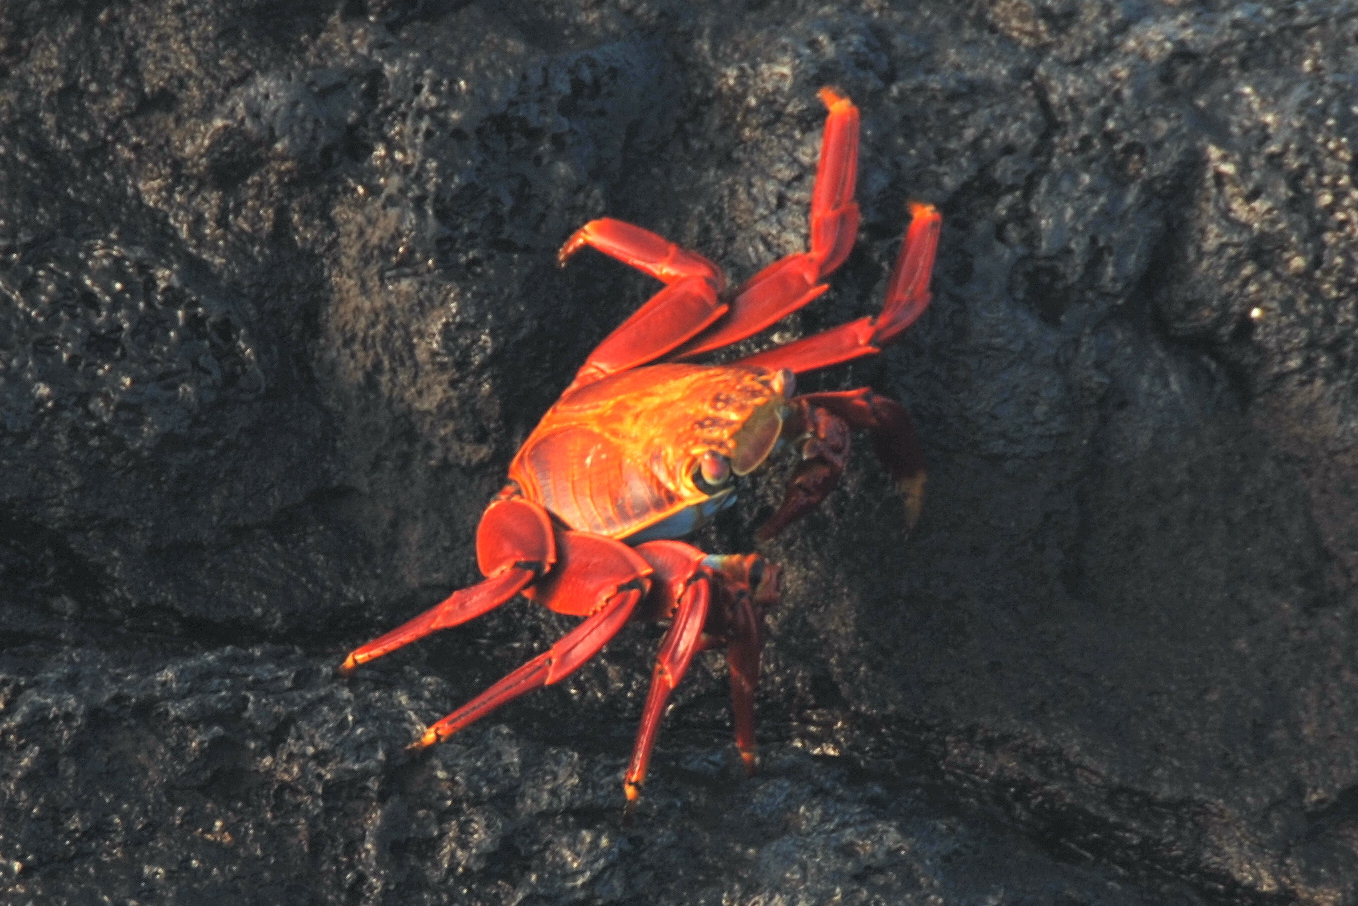 Click picture to see more Sally Lightfoot Crabs.